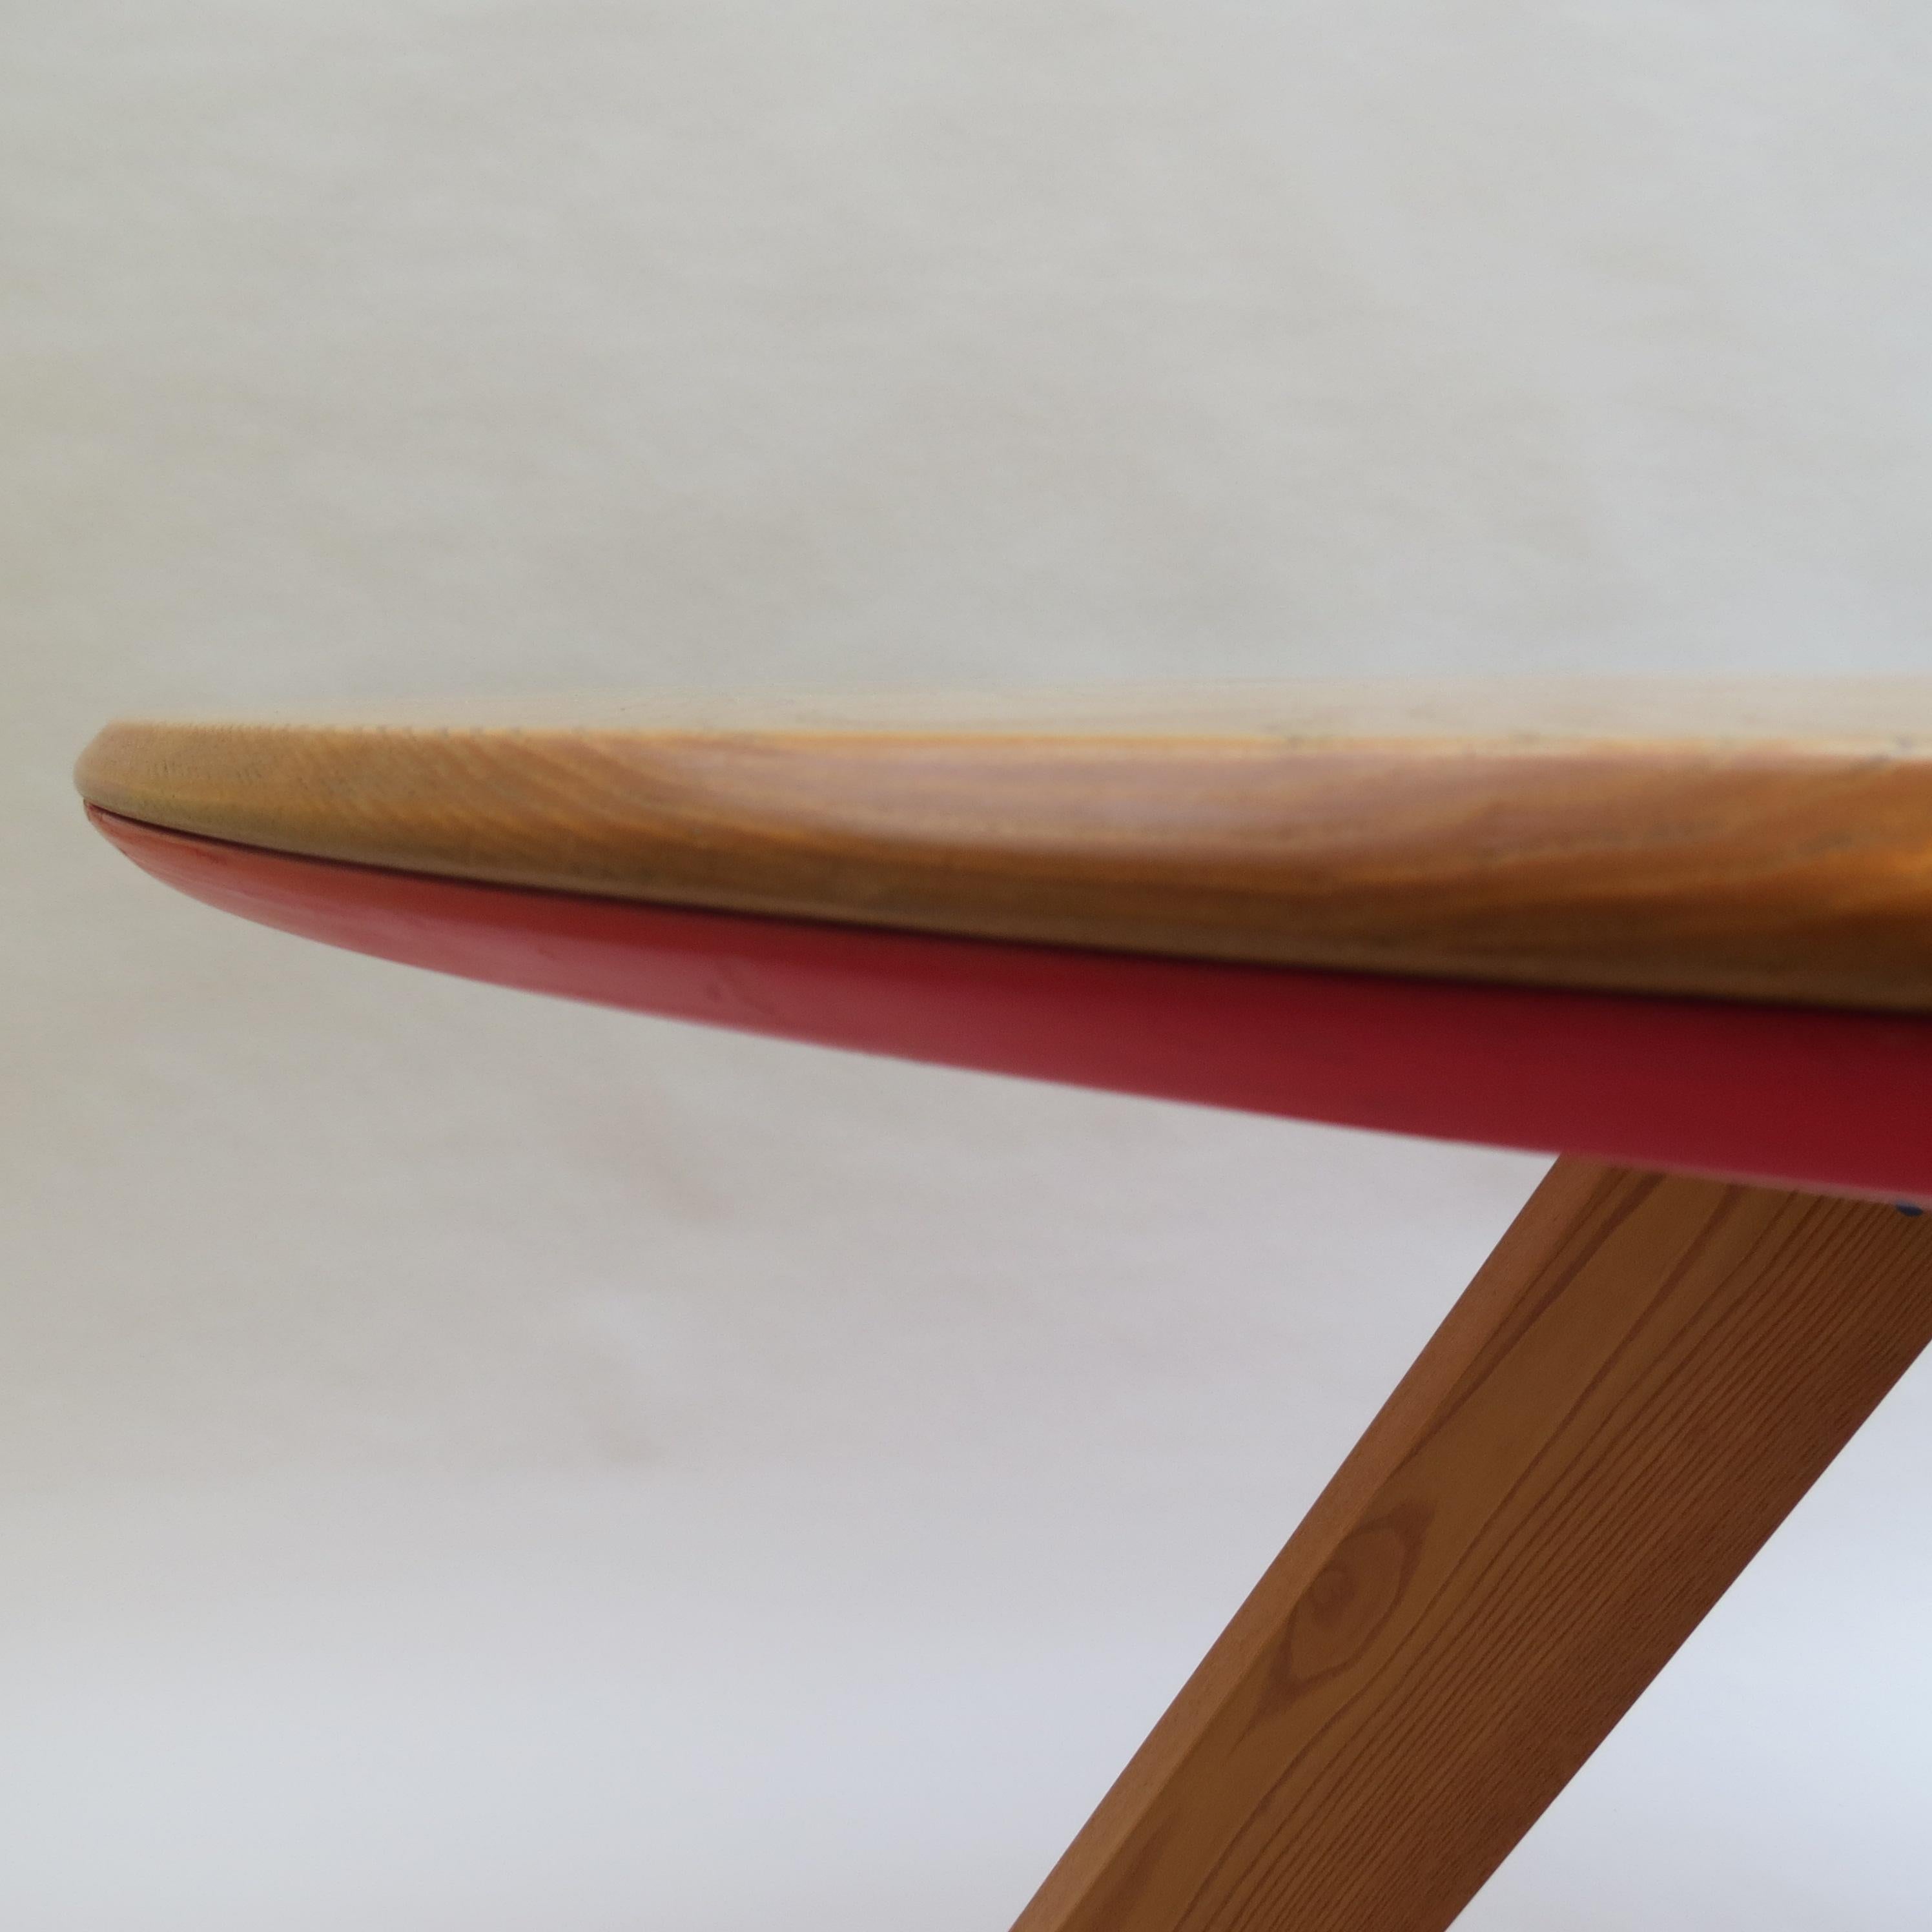 Midcentury Bespoke Circular Ash Dining Table by David Field 1980s with Red Blue 1